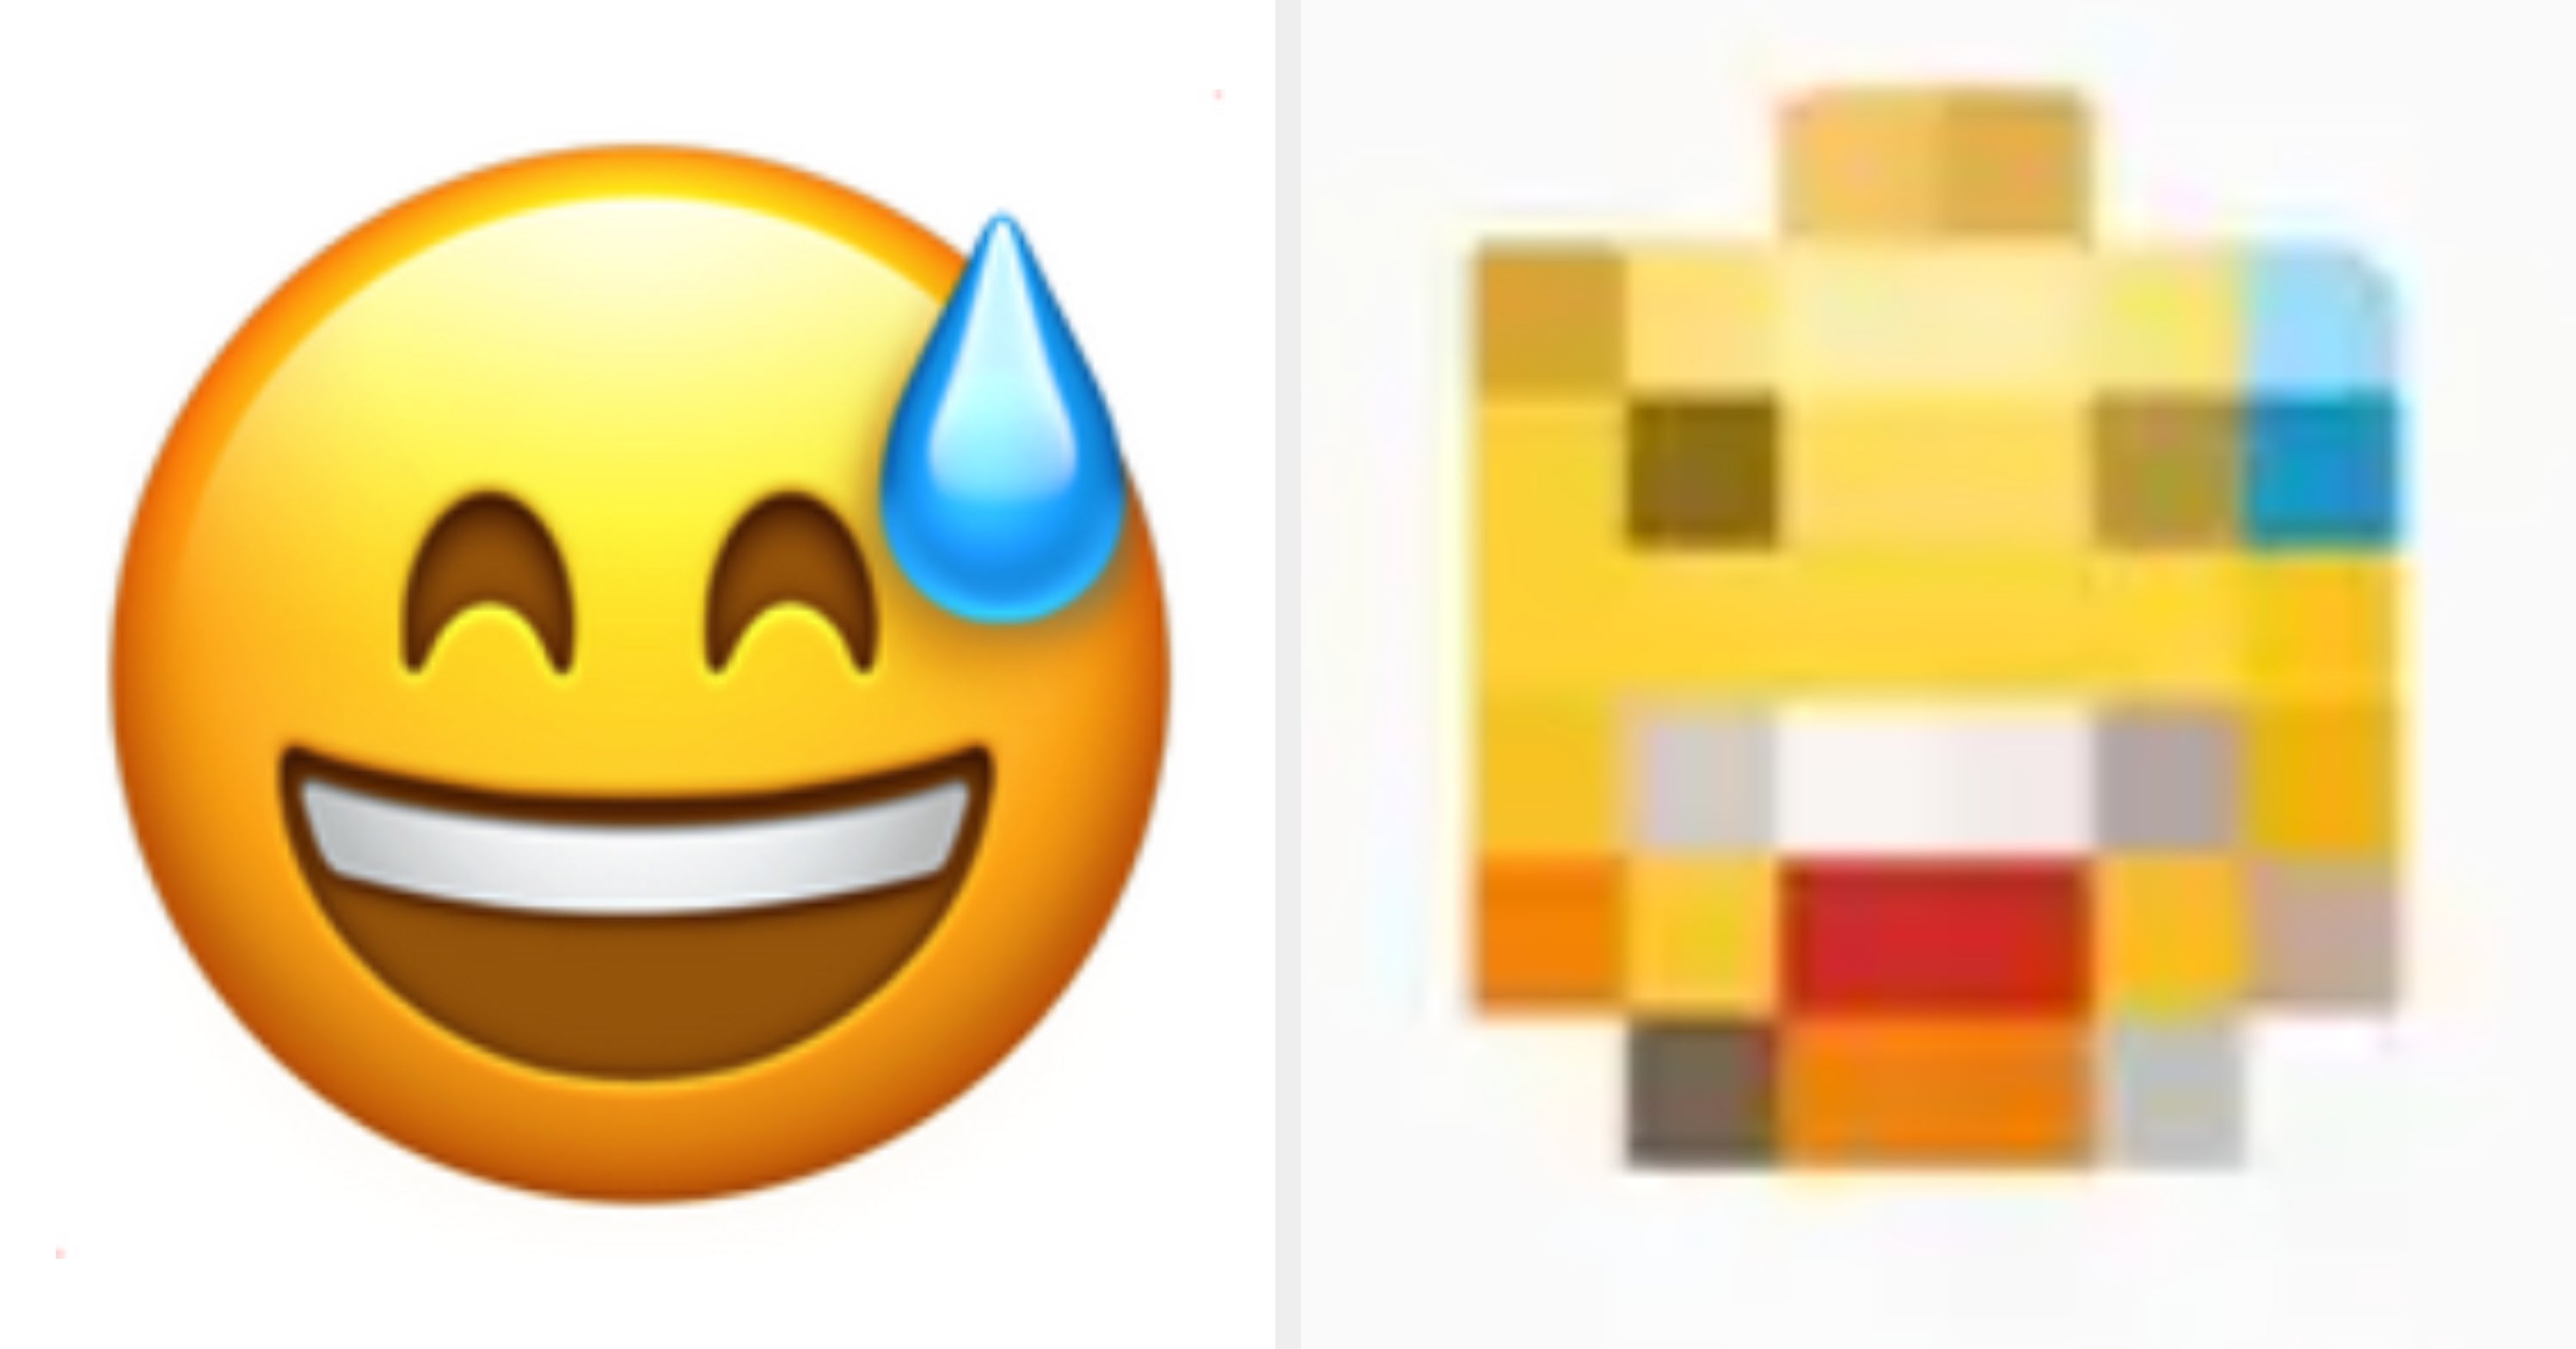 Only A True Emoji Expert Can Identify One From A Blurry Photo